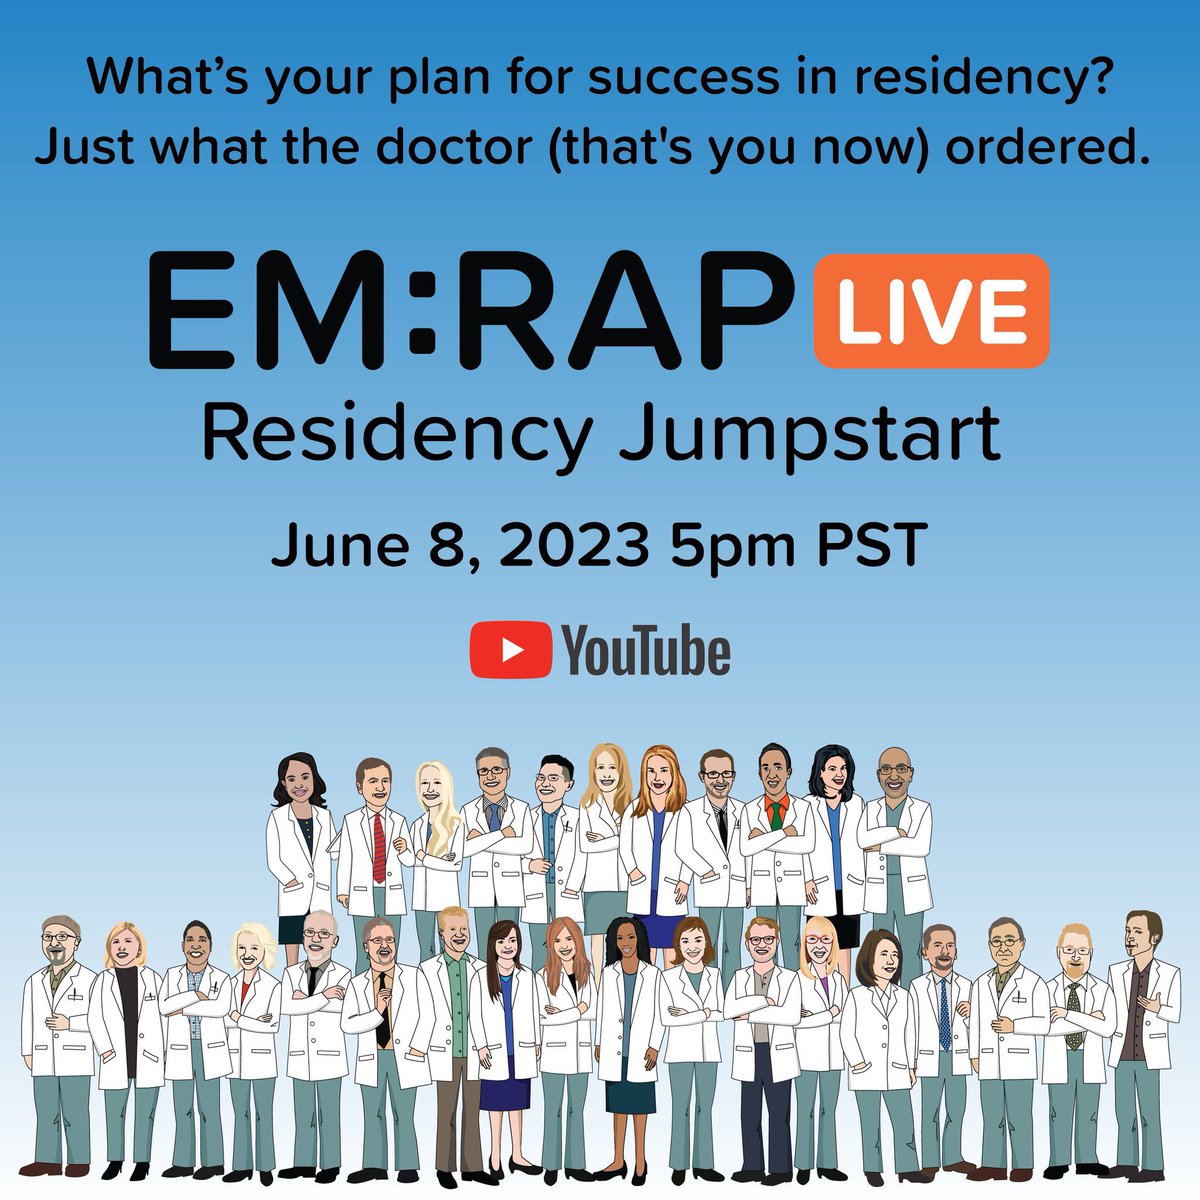 Hey #EMbound folks! What questions about intern year do you have? Drop them here and we’ll make sure they come up at the @emrap_tweets Residency Jumpstart, 5pm PST on June 8! Sign up here: mailchi.mp/emrap.org/gn7p… @emresidents #FOAMed #MedEd #MedTwitter #emergencymedicine